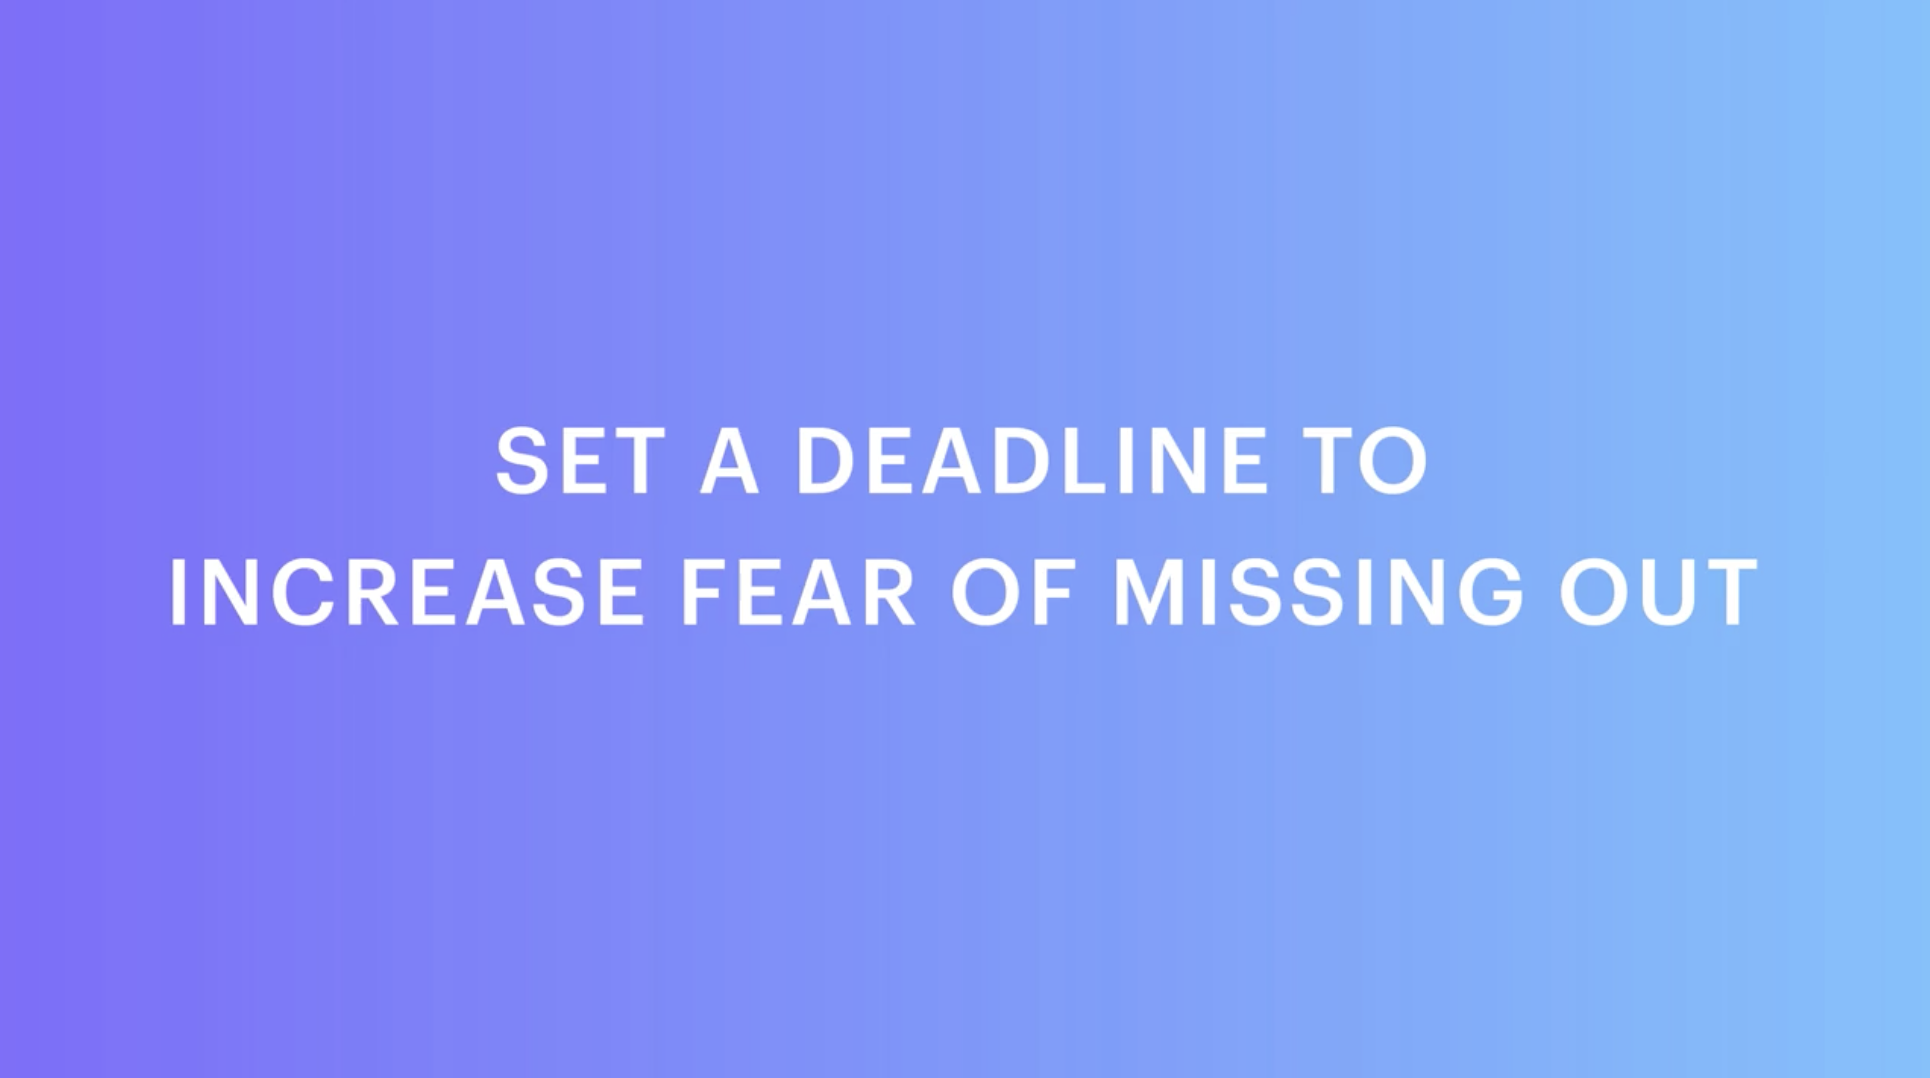 Set a deadline to increase fear of missing out - How FOMO can help with last chance emails